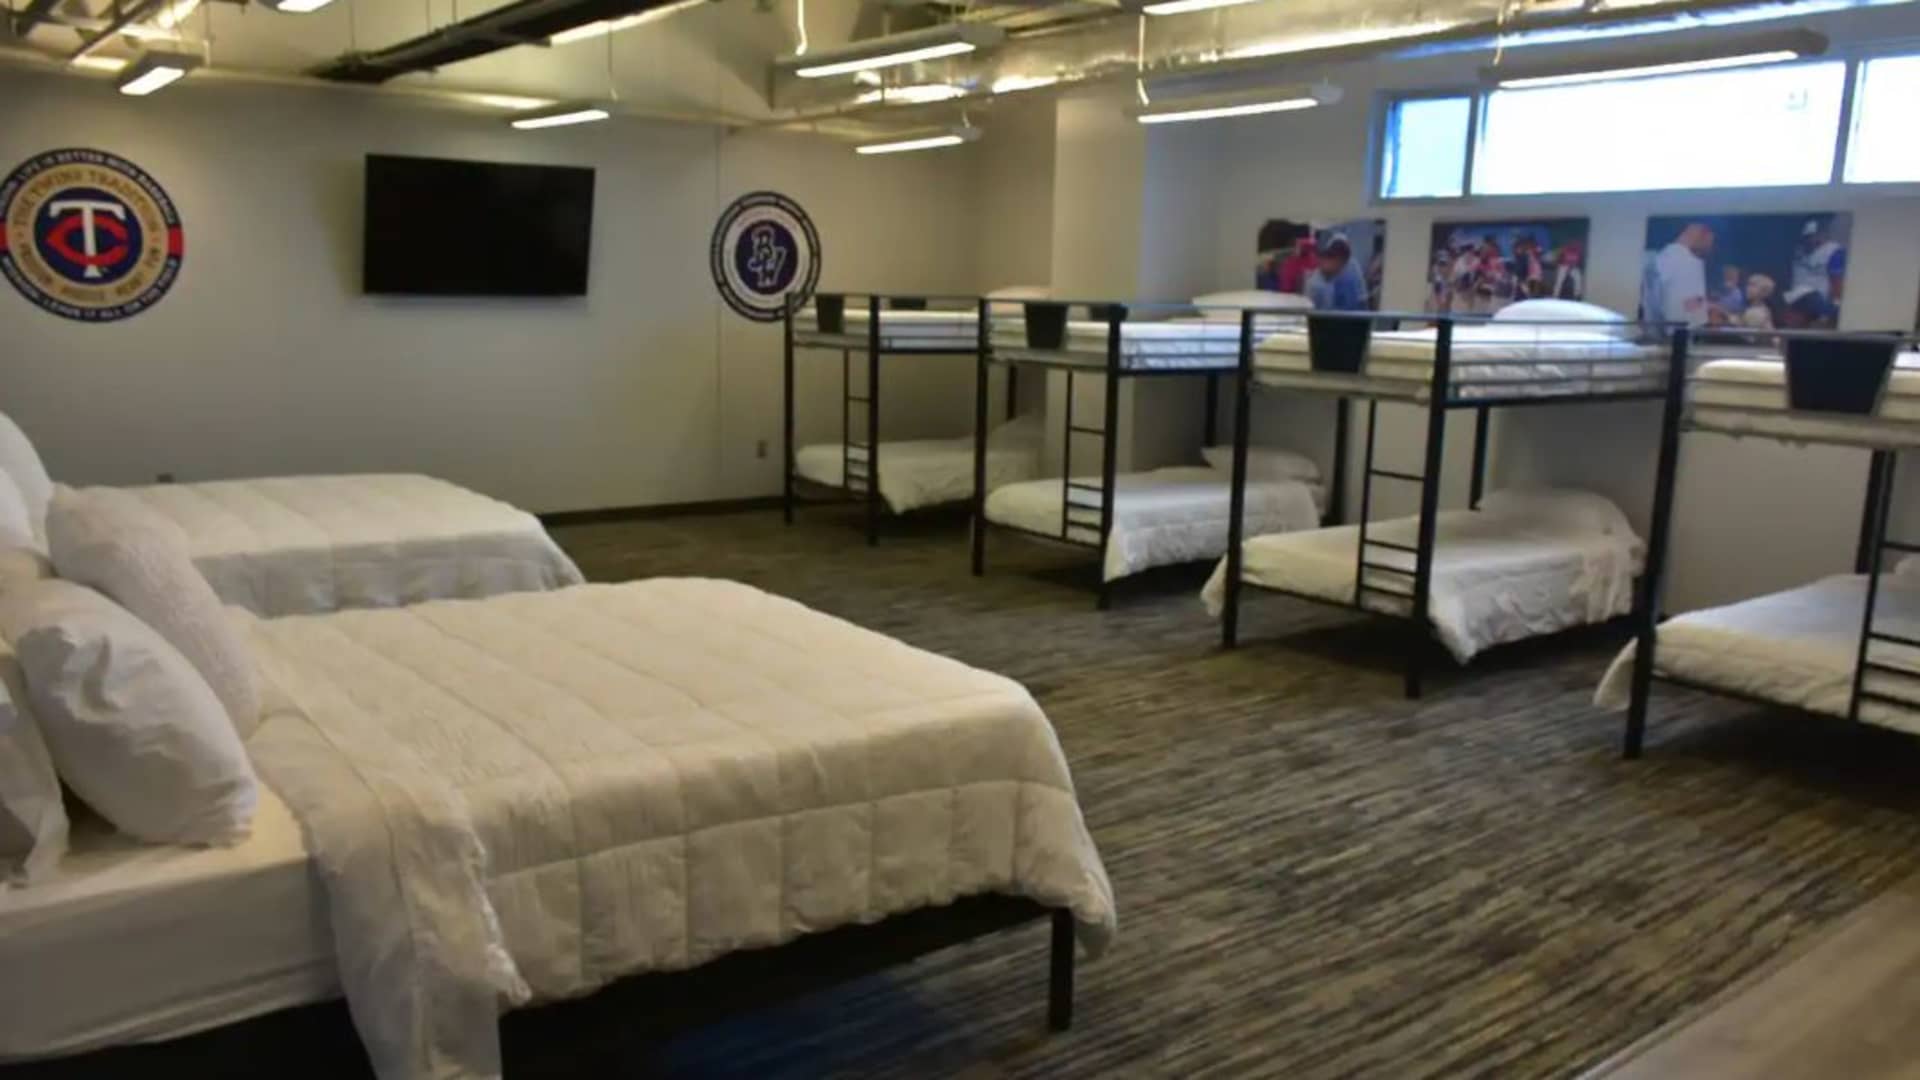 The bedroom at Blue Wahoos Stadium sleeps a maximum of 10 guests.